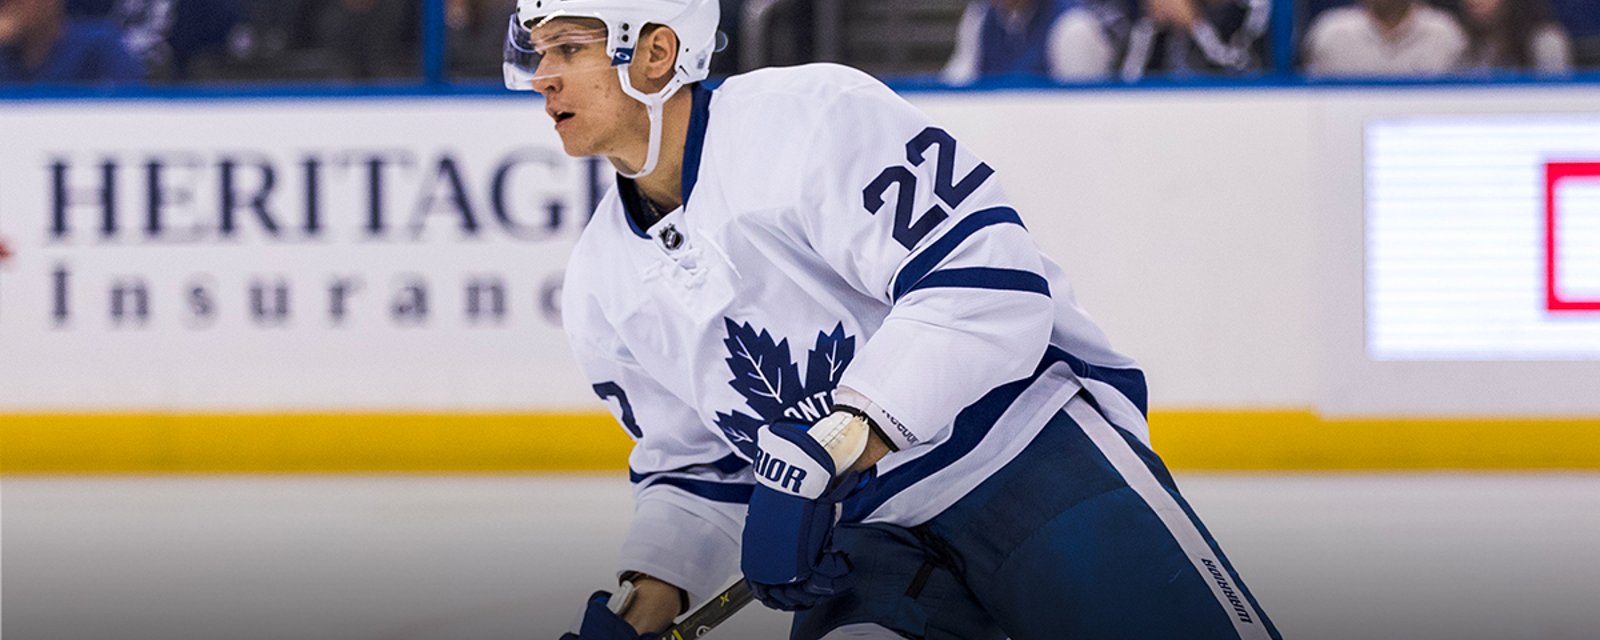 Report: Zaitsev helping Leafs pursue top KHL free-agent 